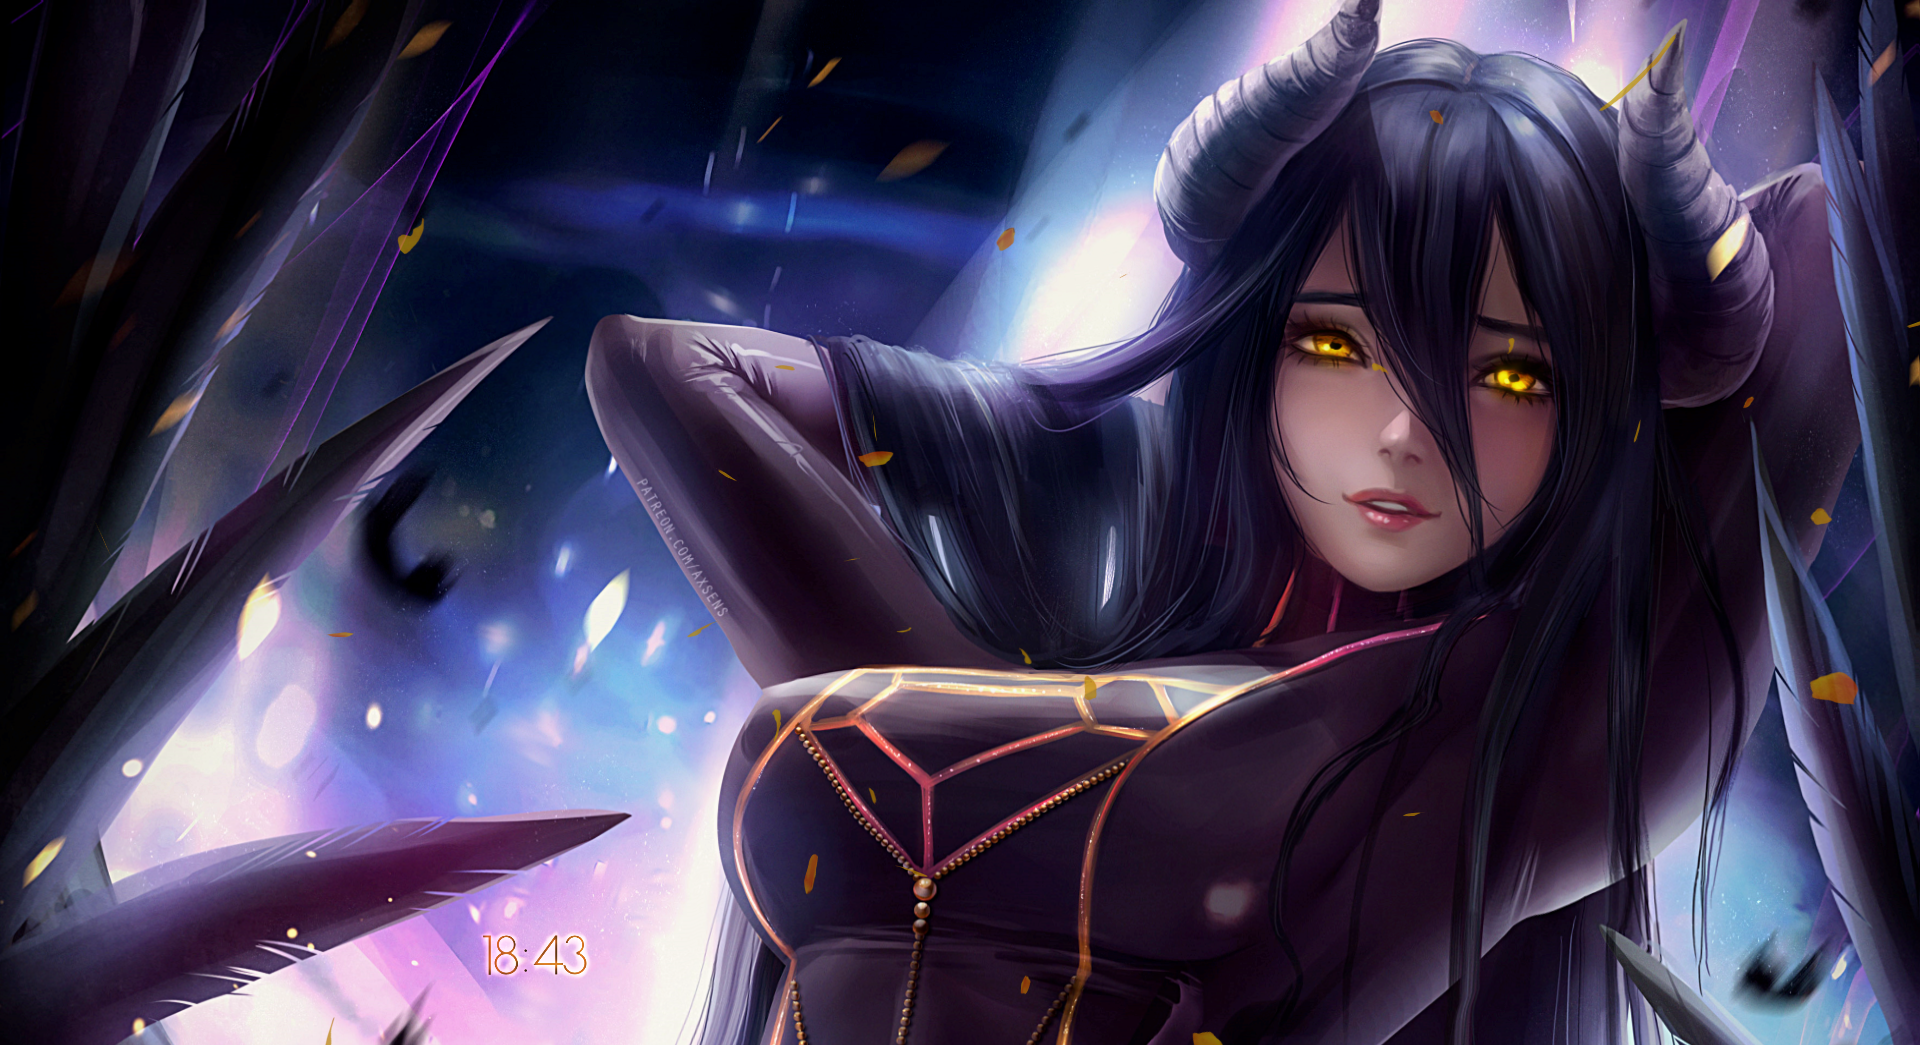 Albedo Overlord live wallpaper [DOWNLOAD FREE]